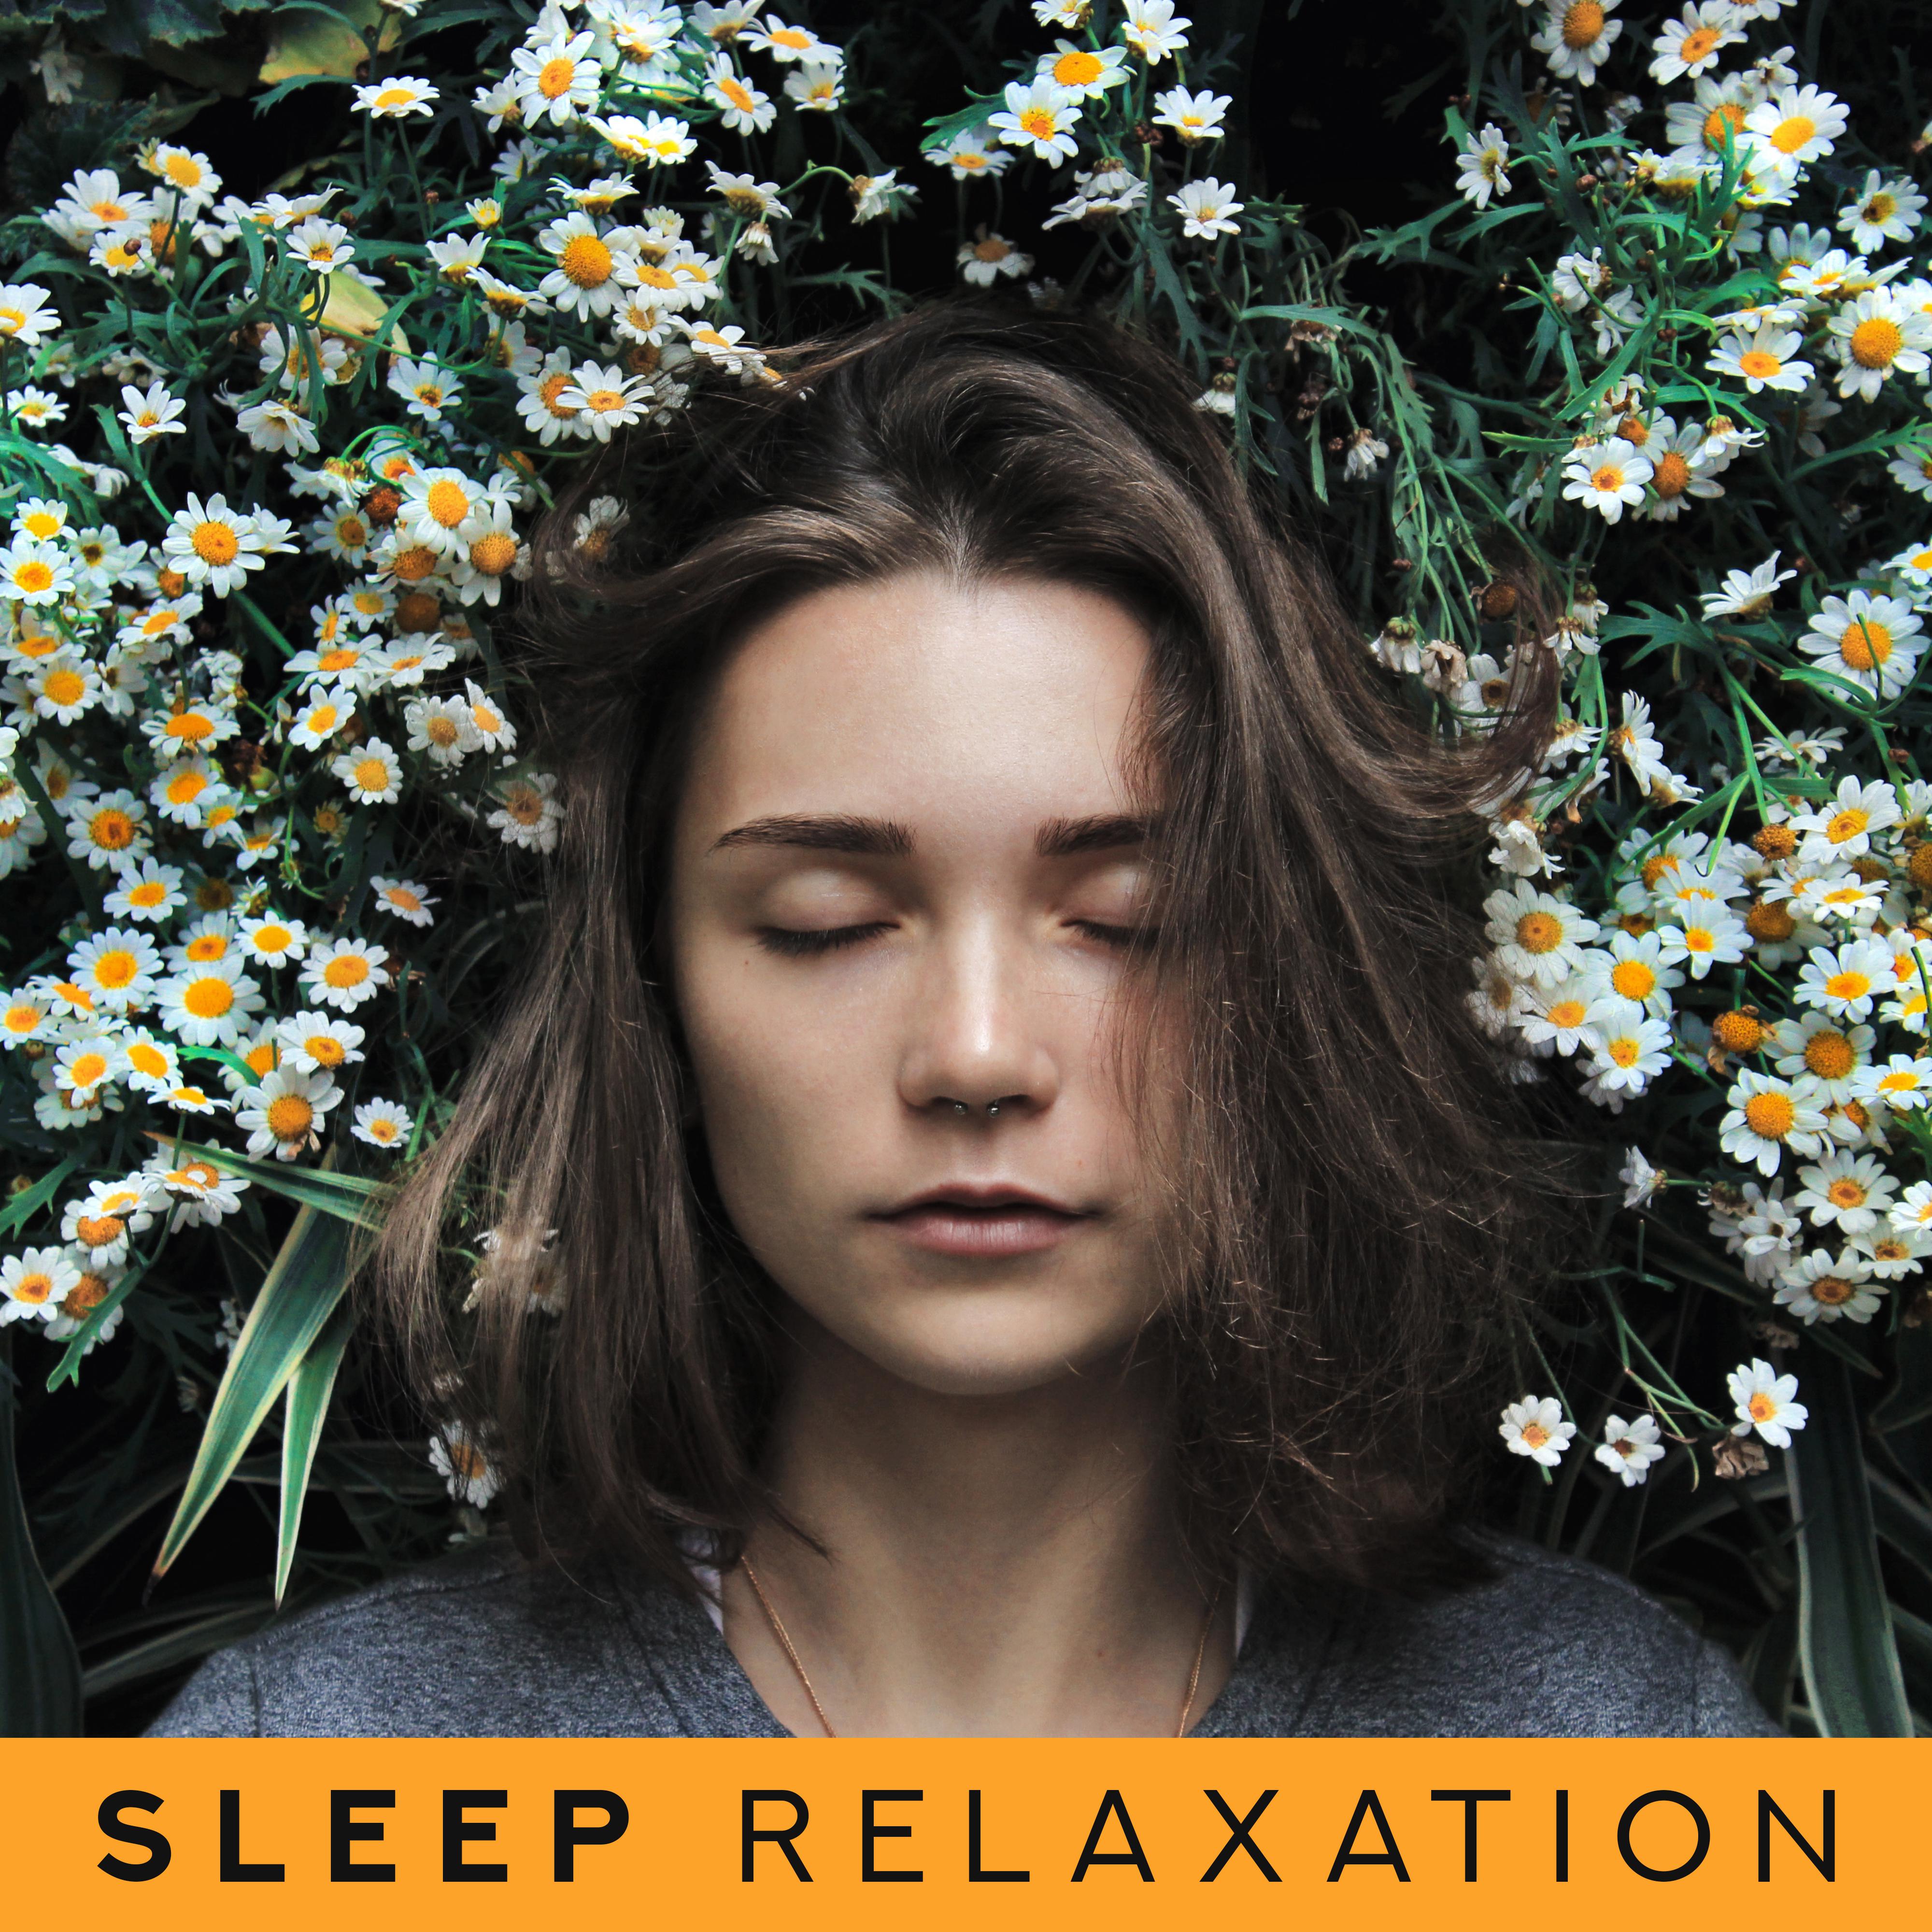 Sleep Relaxation  Healing Music to Rest, Sleep, Relaxation, Sleep Songs, Relaxing Lullabies to Calm Down, Soothing Sounds at Night